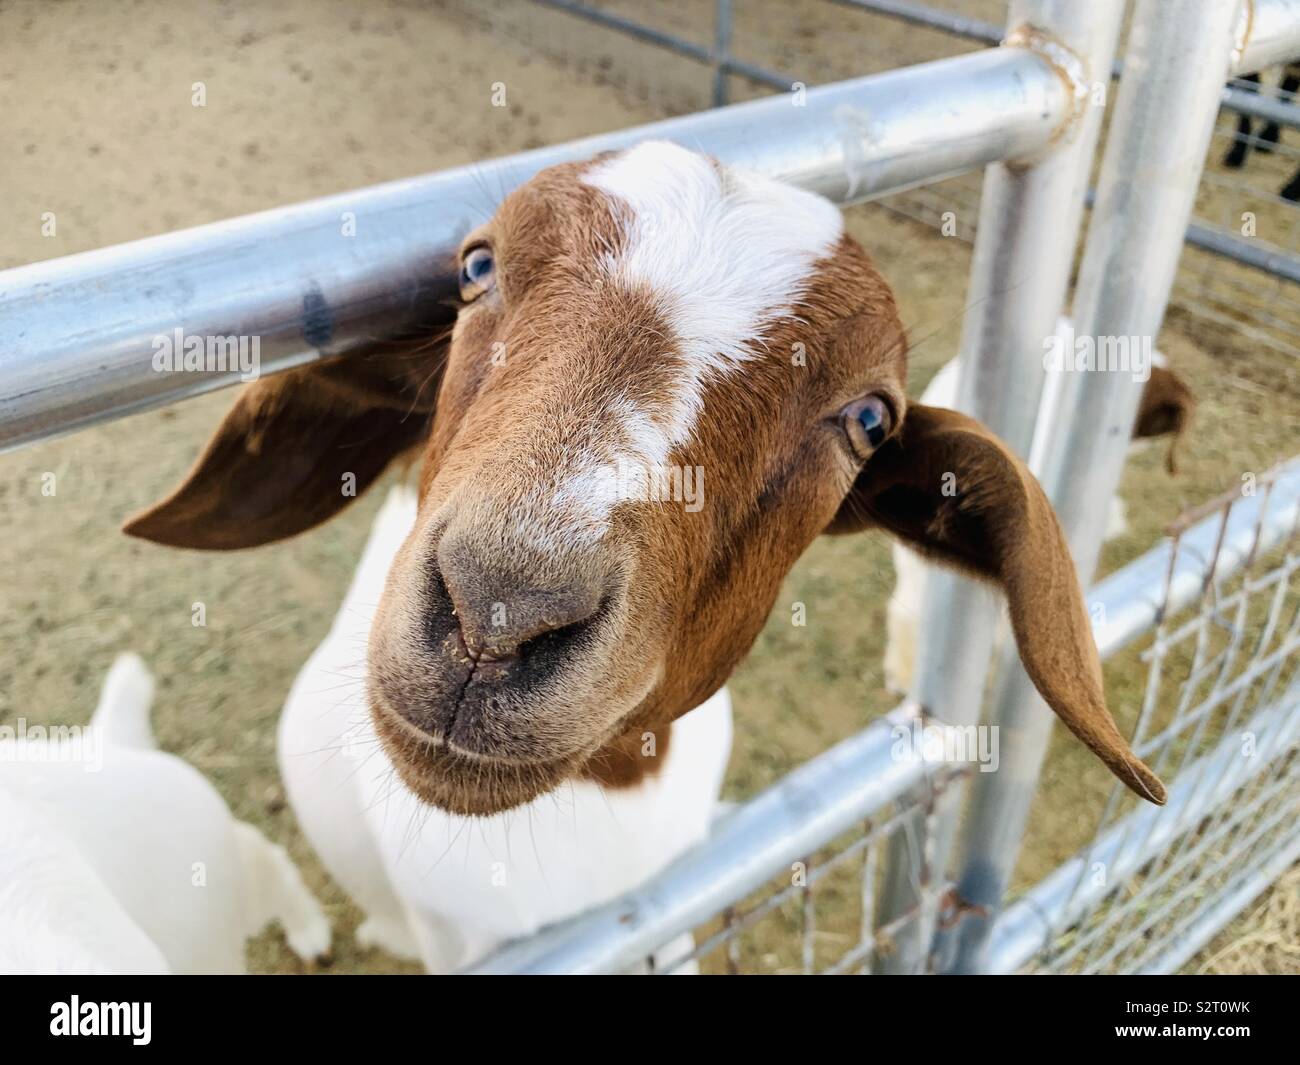 A goat poking its head through a fence on a ranch. Stock Photo